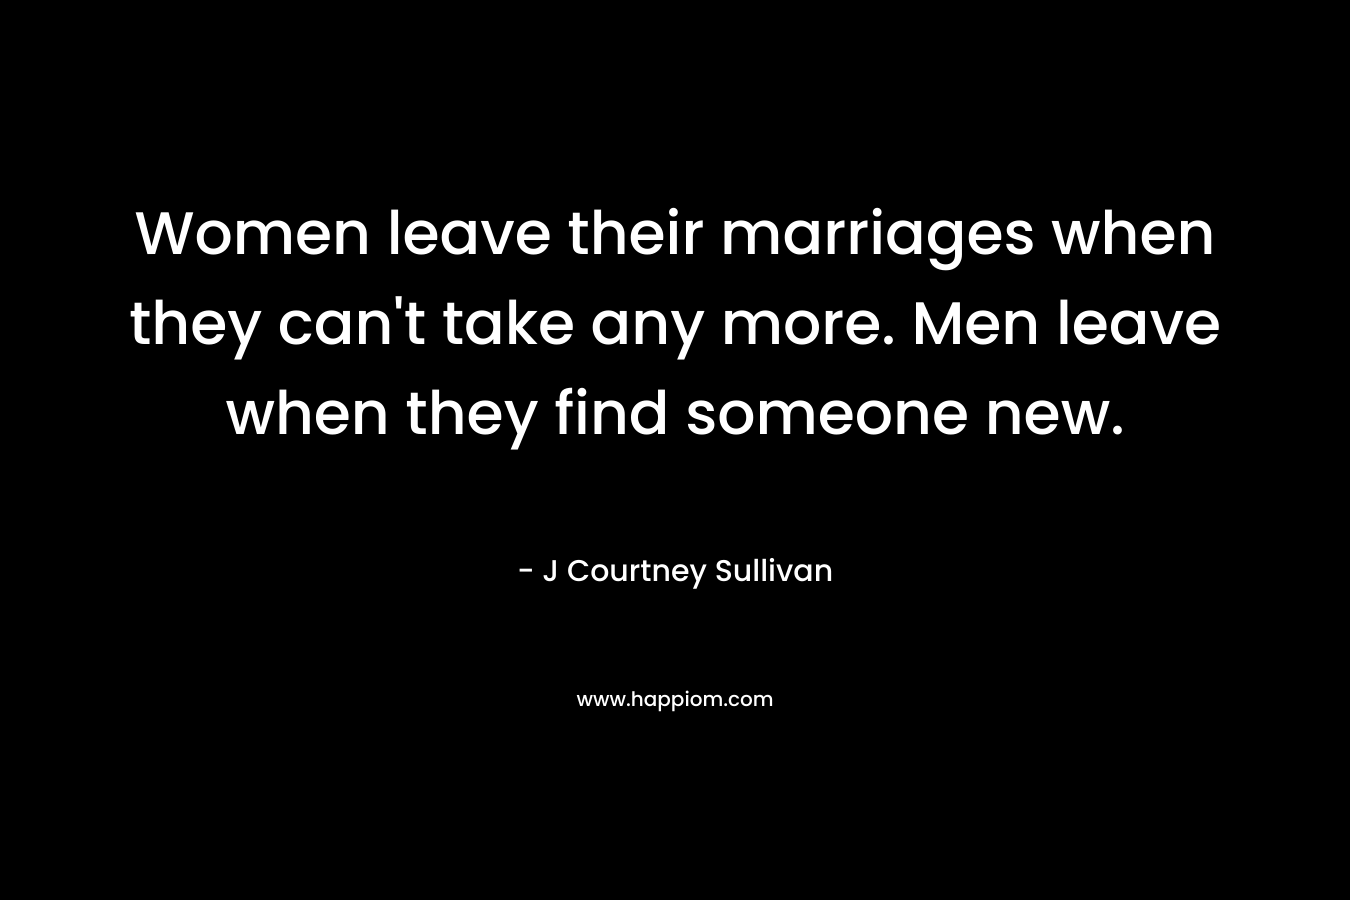 Women leave their marriages when they can’t take any more. Men leave when they find someone new. – J Courtney Sullivan